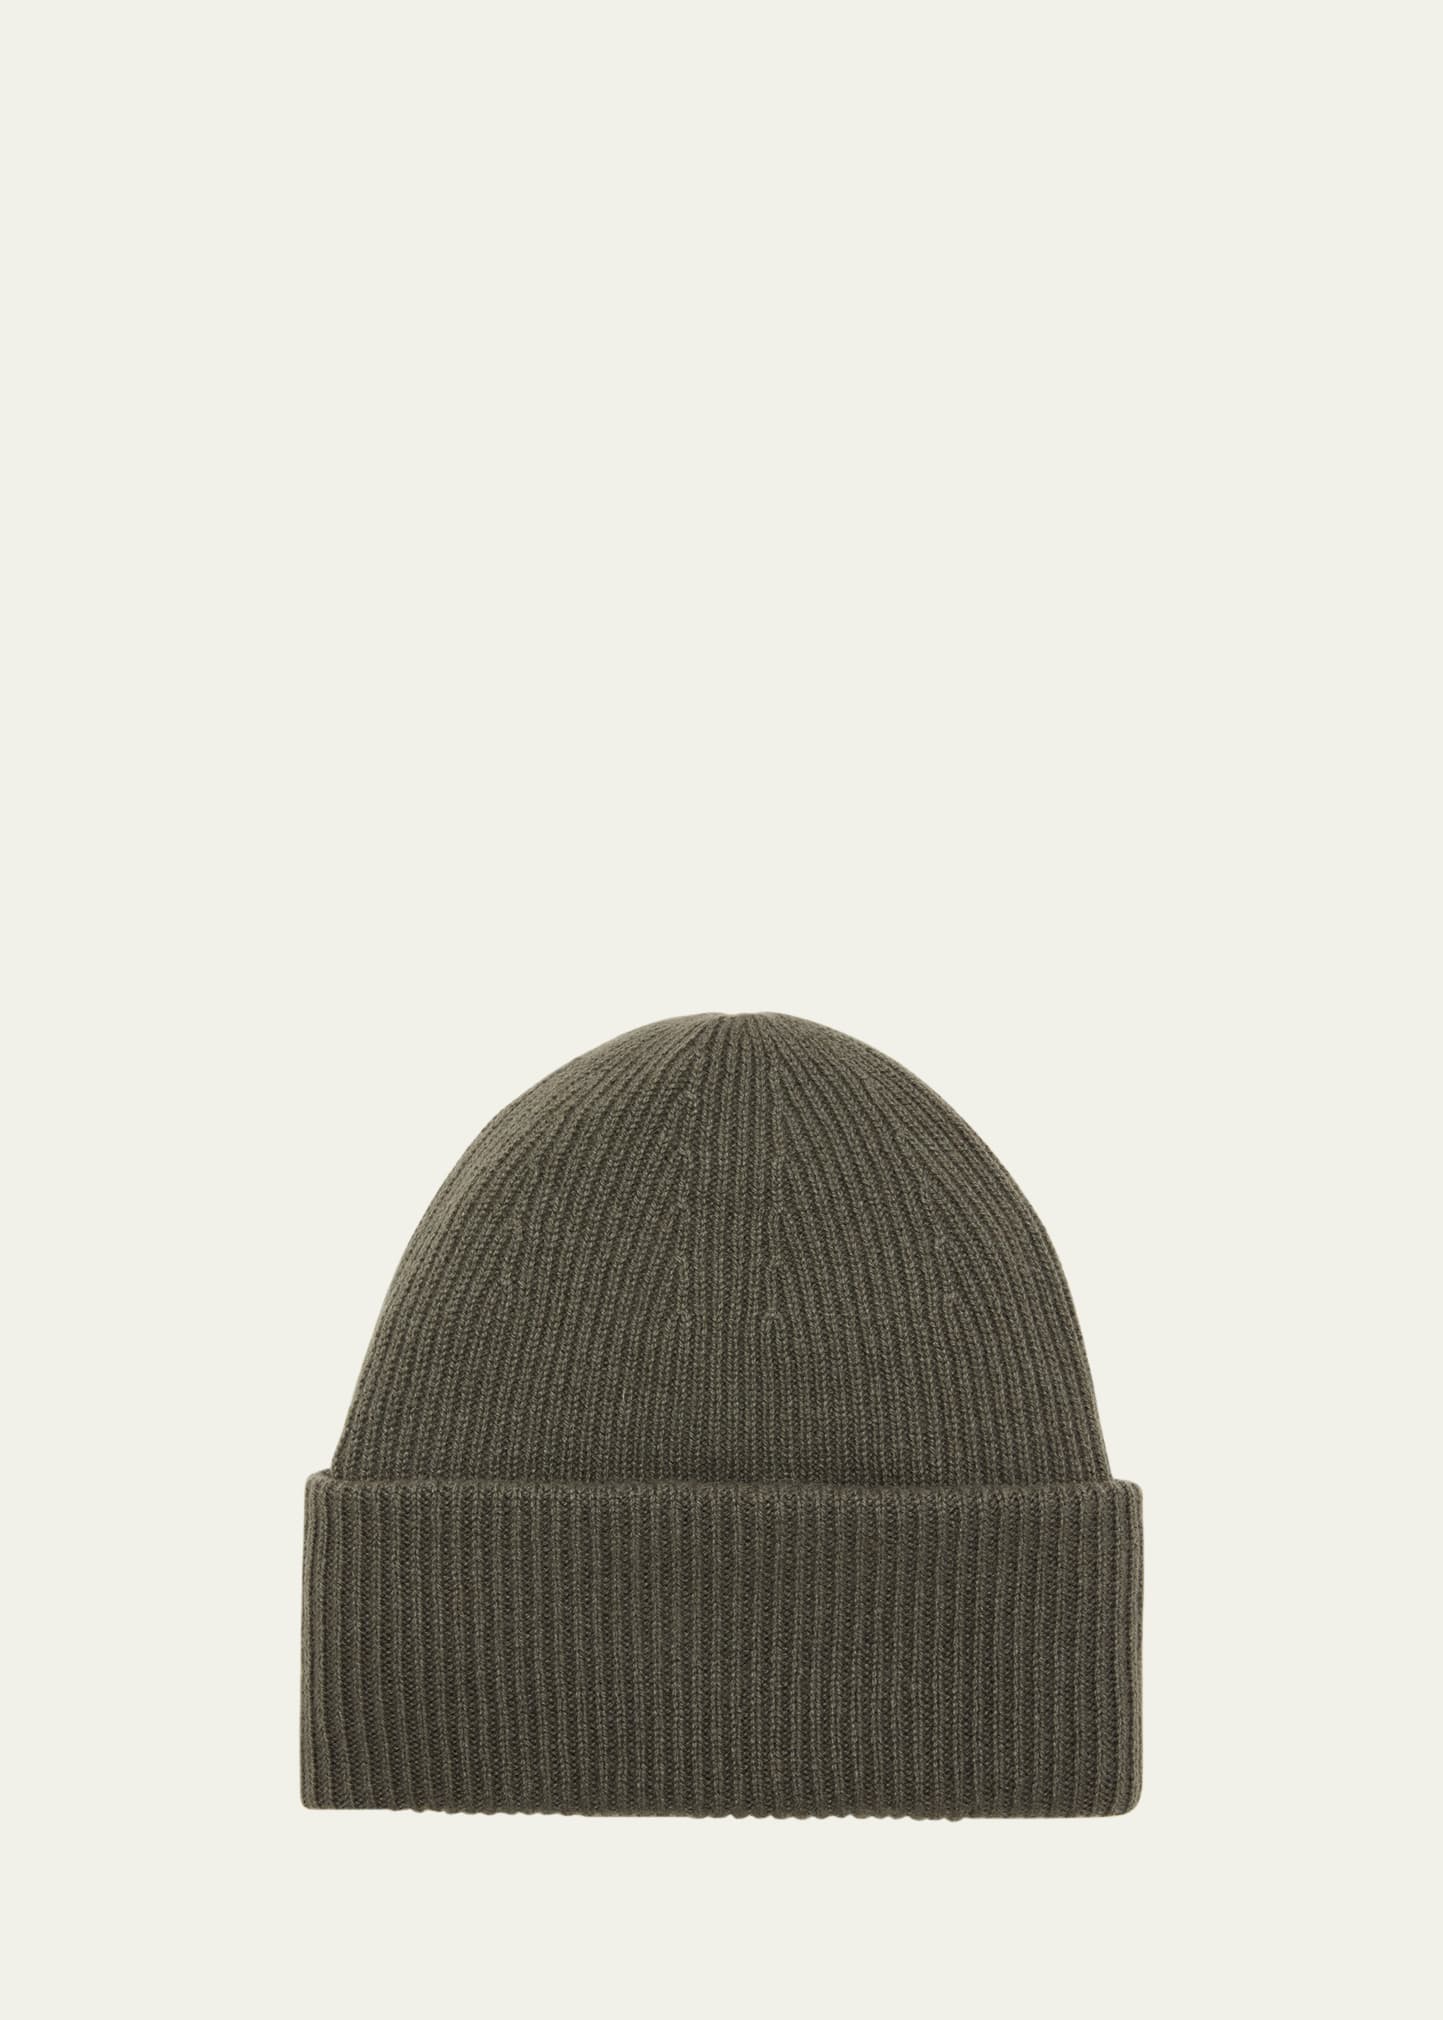 Lisa Yang Stockholm Ribbed Cashmere Beanie In Fern